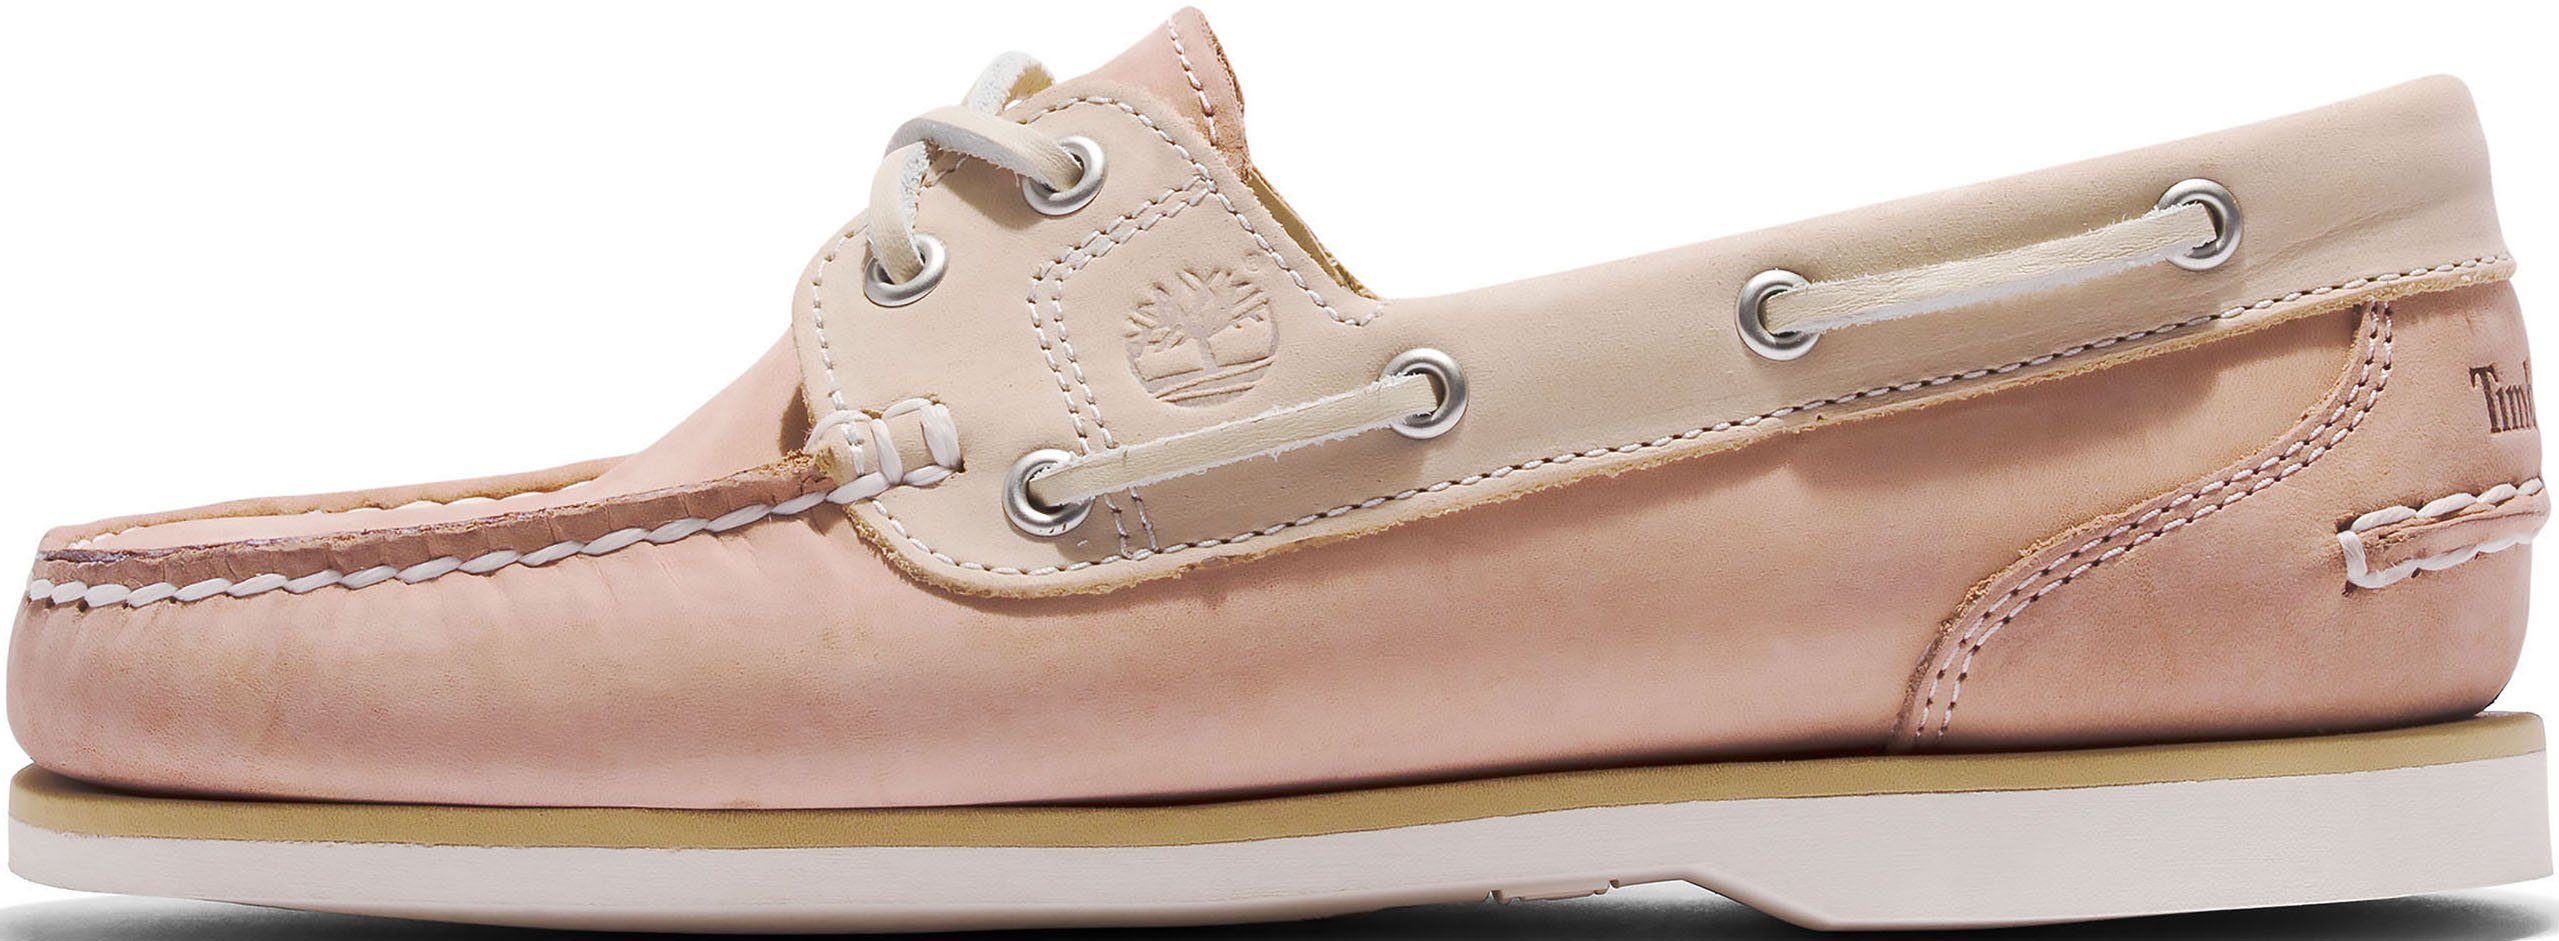 Timberland Classic Boat 2 Bootsschuh beige Eye